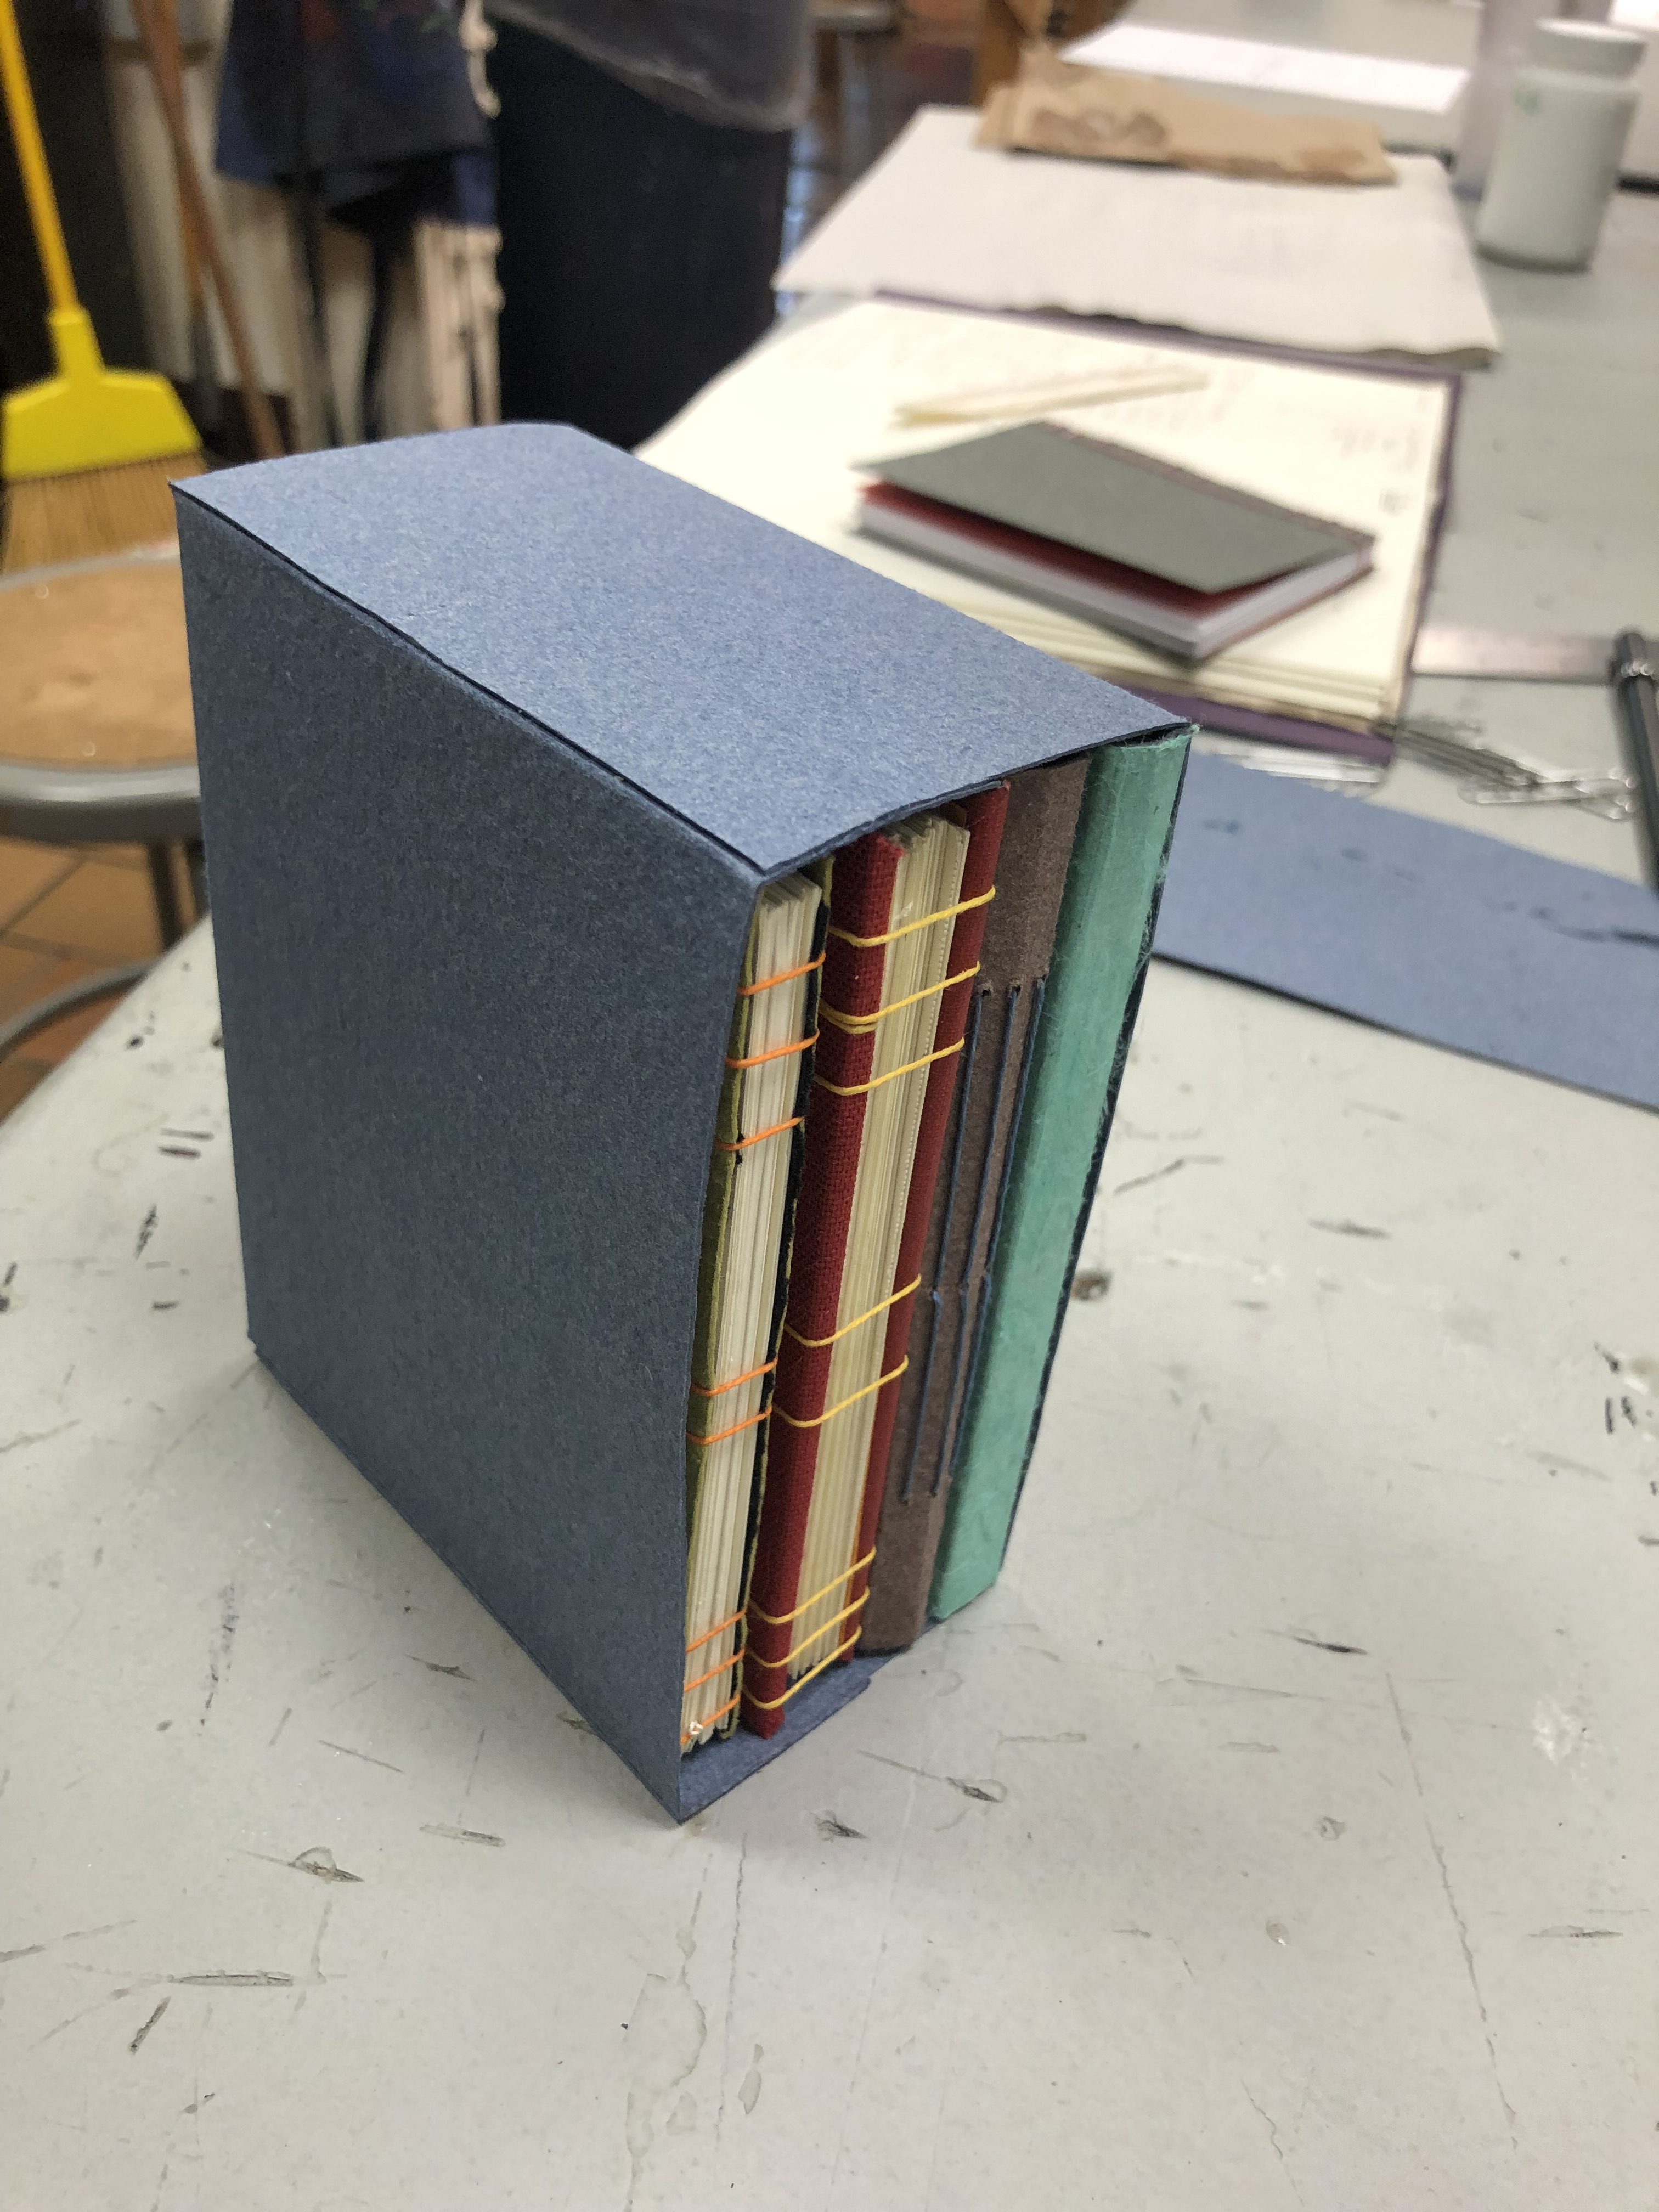 A handmade paper case for books with books inside